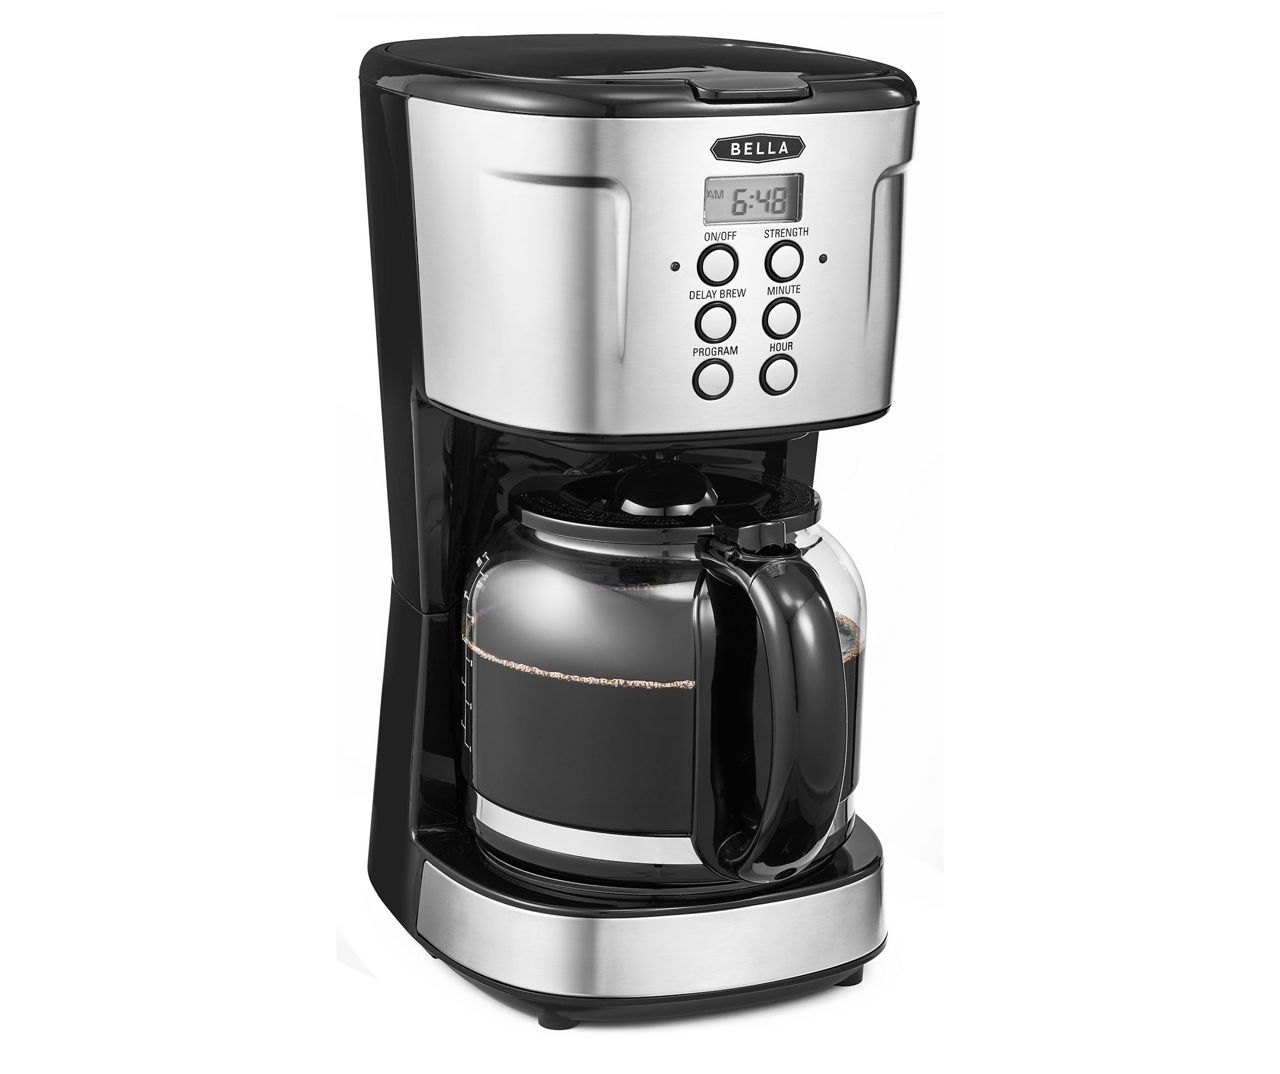 Bella 12 Cup Programmable Coffee Maker Review 